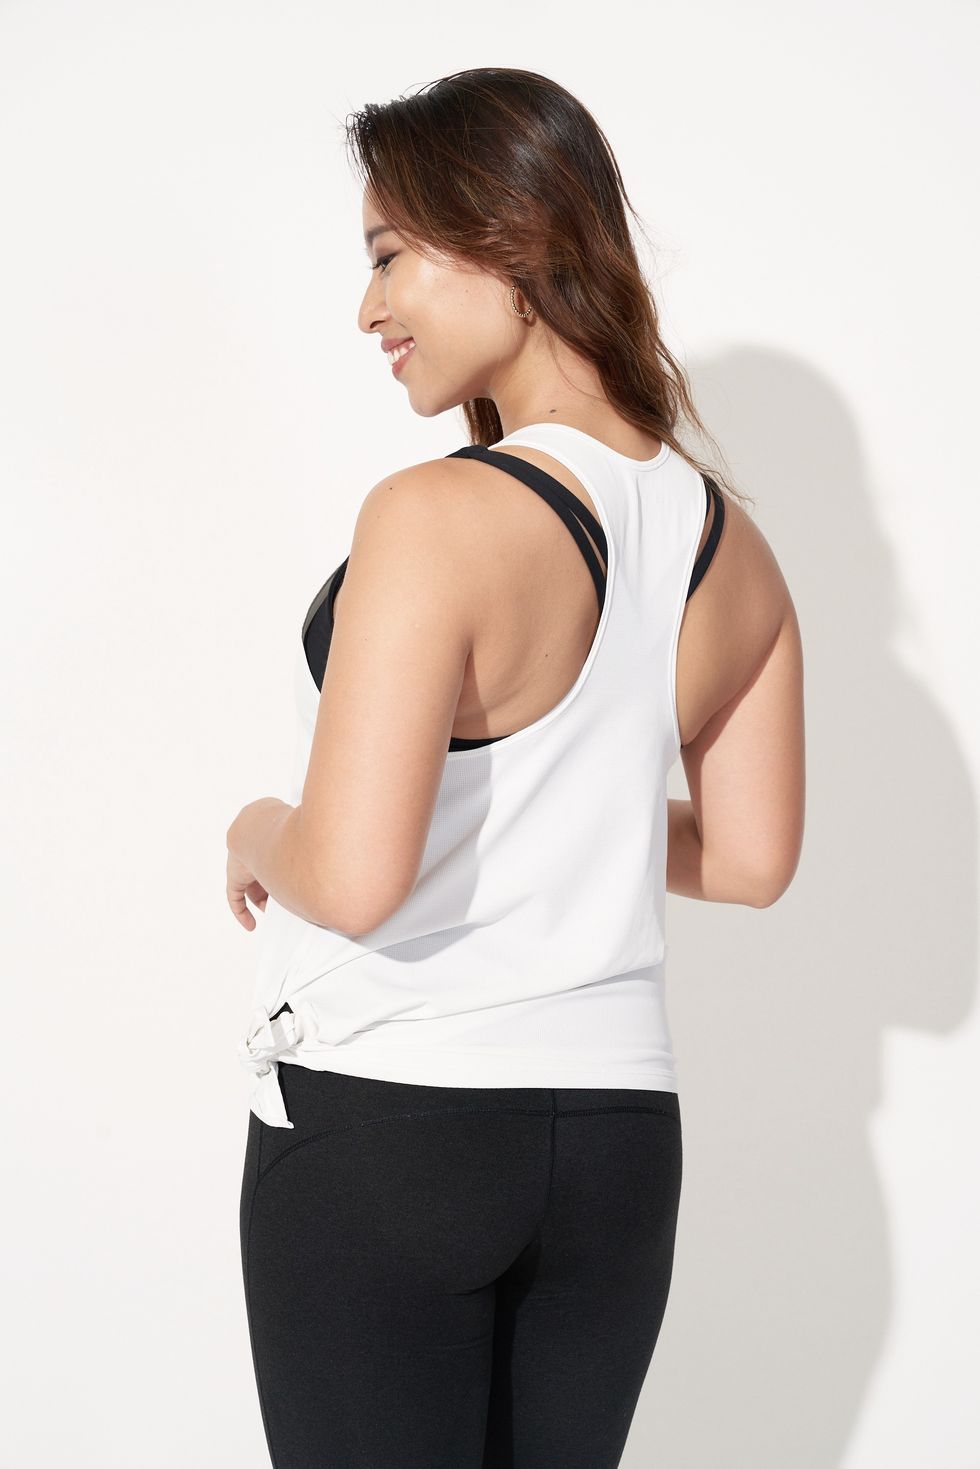 White, Clothing, Shoulder, Sportswear, Arm, Neck, Waist, Joint, Standing, Muscle, 